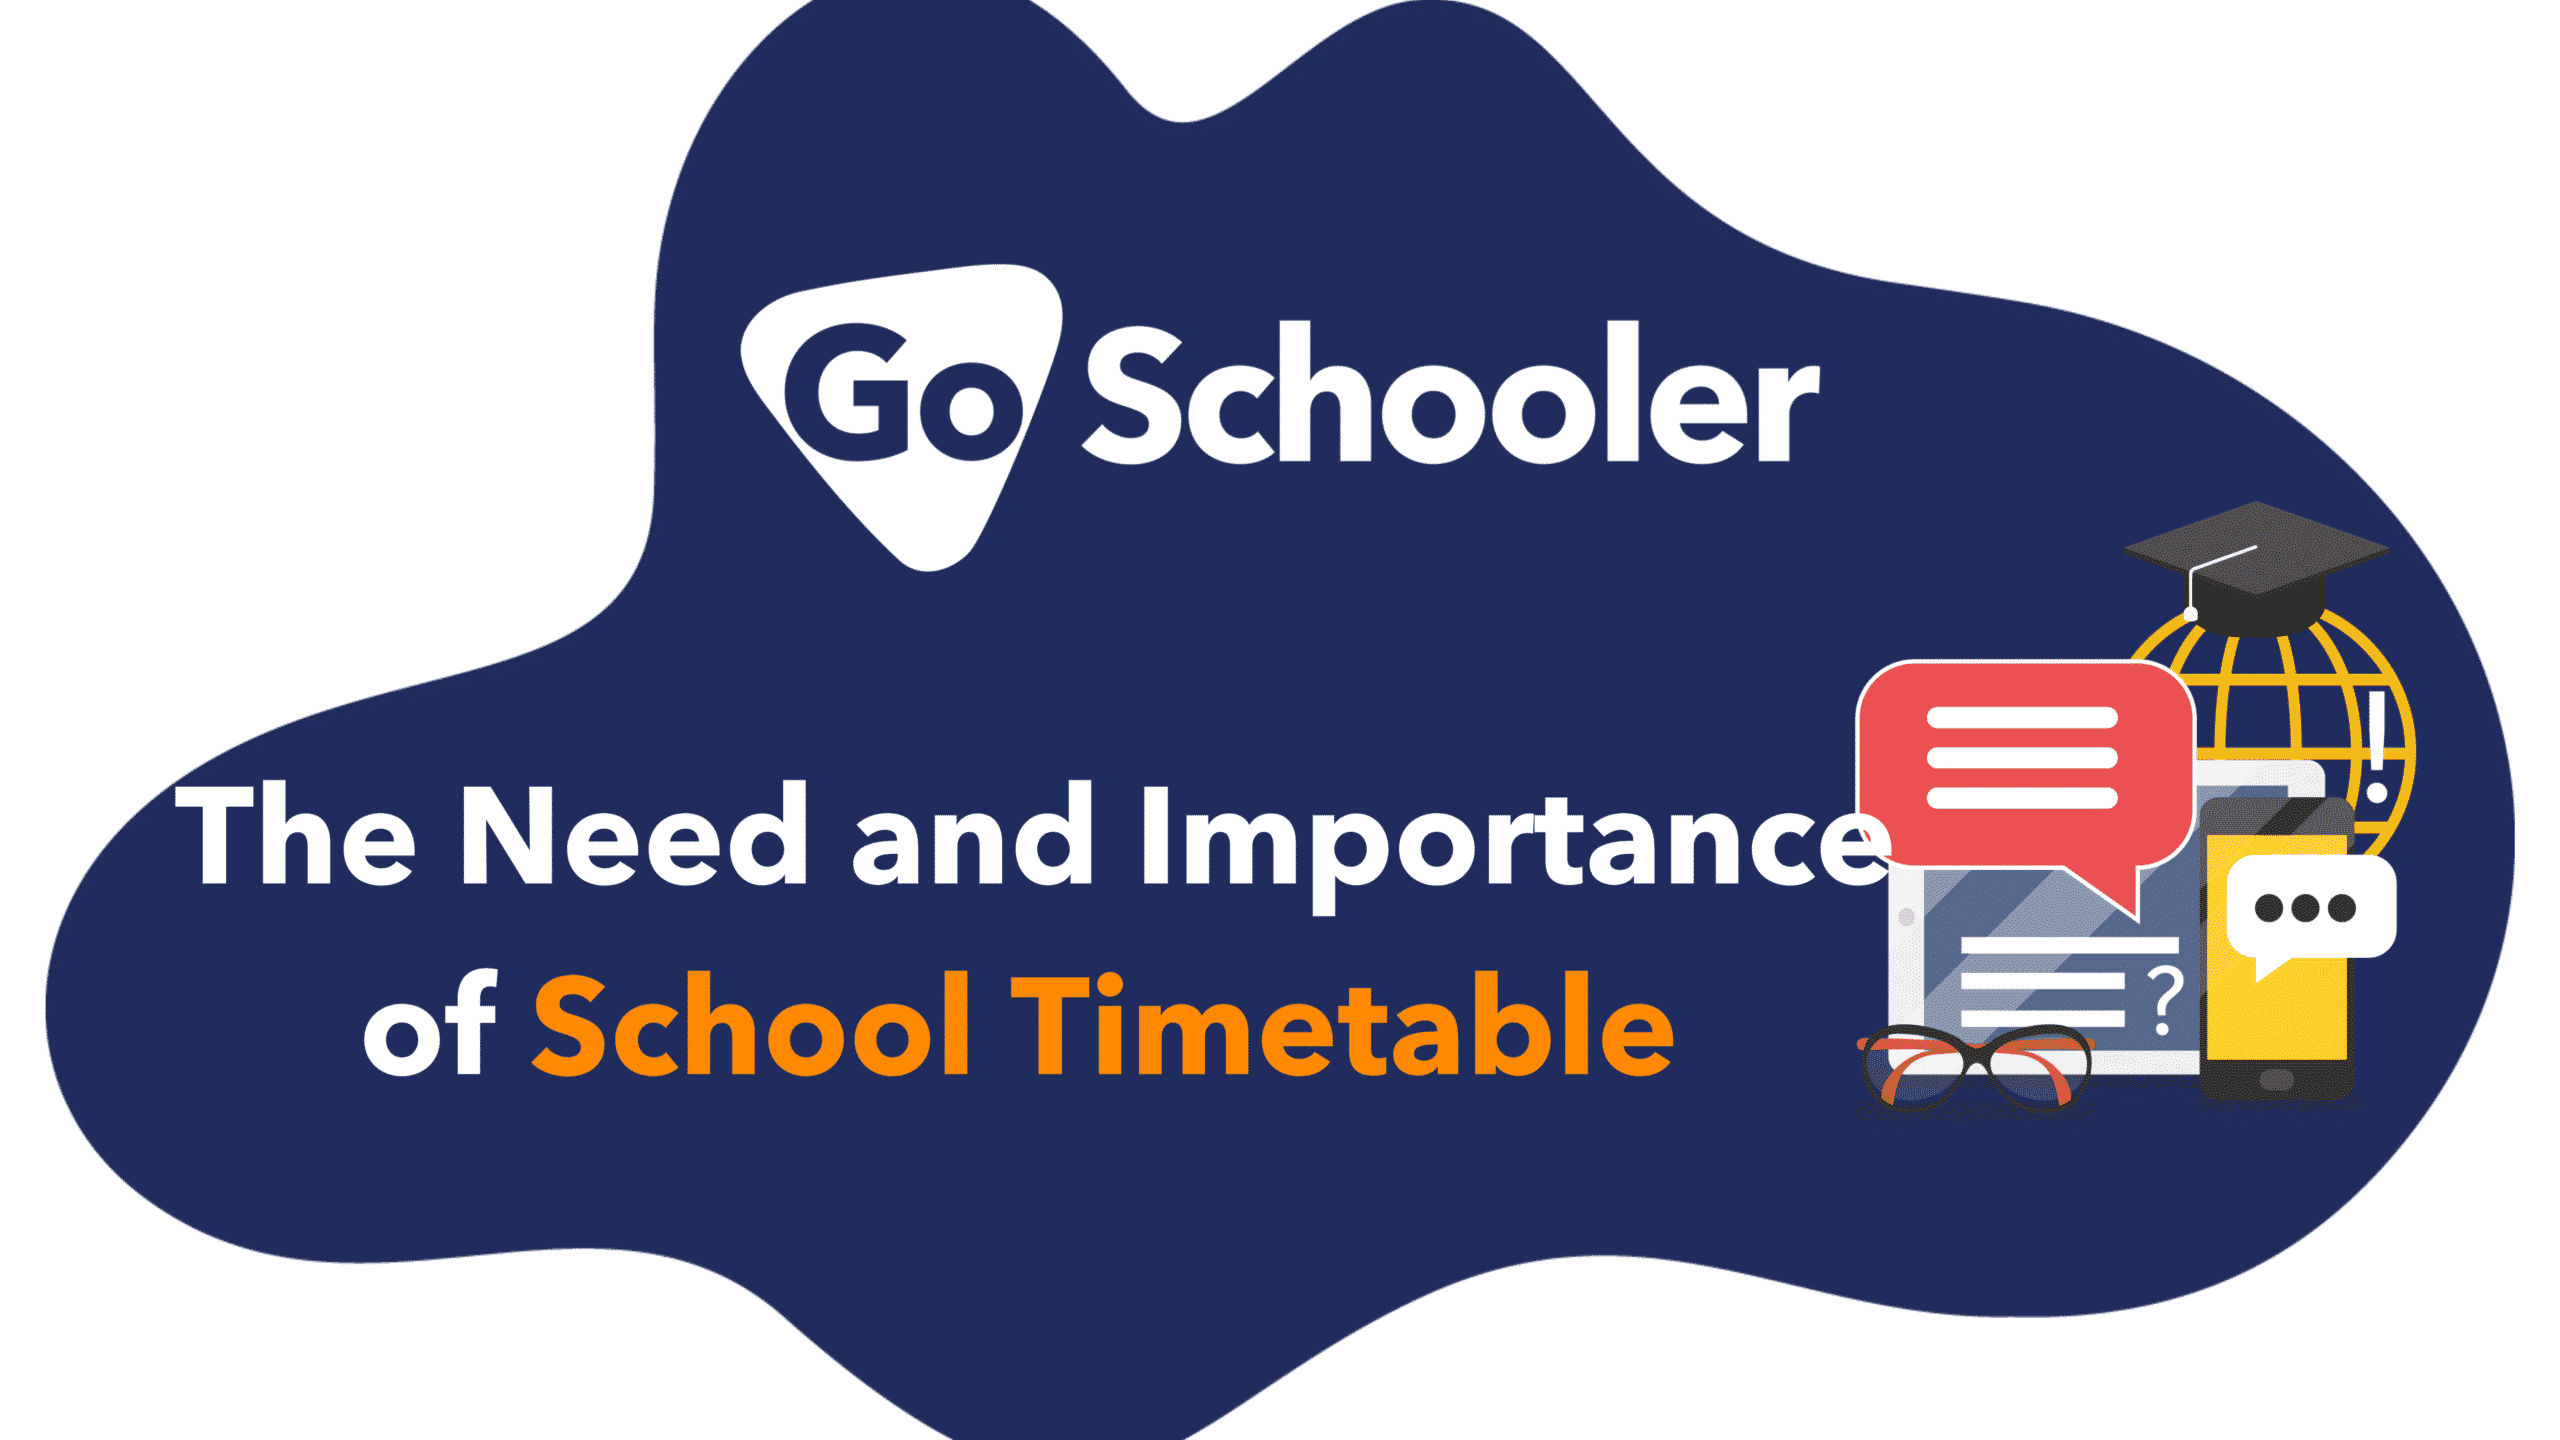 The Need and Importance of School Timetable